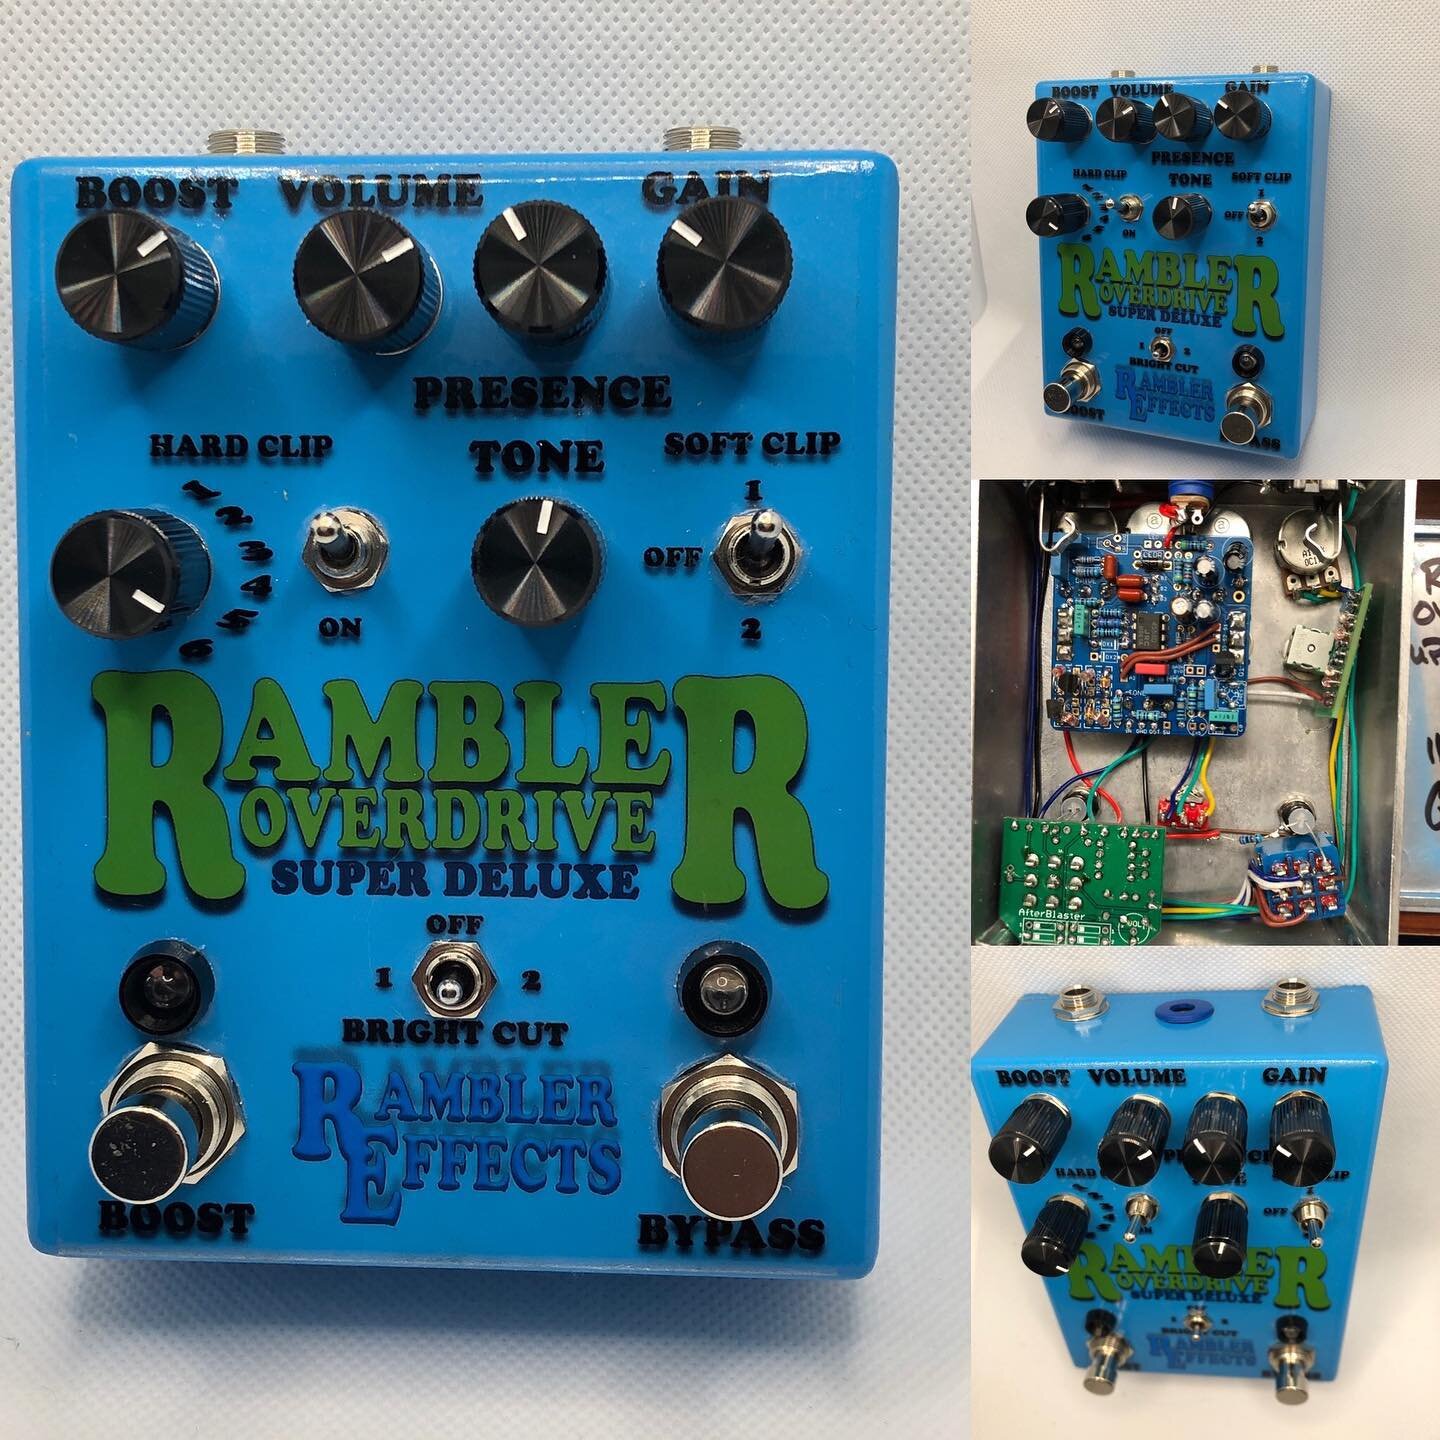 I said it was coming soon and here it is!  The Rambler Overdrive Super Deluxe!  This is an overdrive with no limits and a stacked boost for even more drive and volume!
#handbuilteffectpedals #rocknroll #effectspedals #guitarpcb #aionelectronics #gene